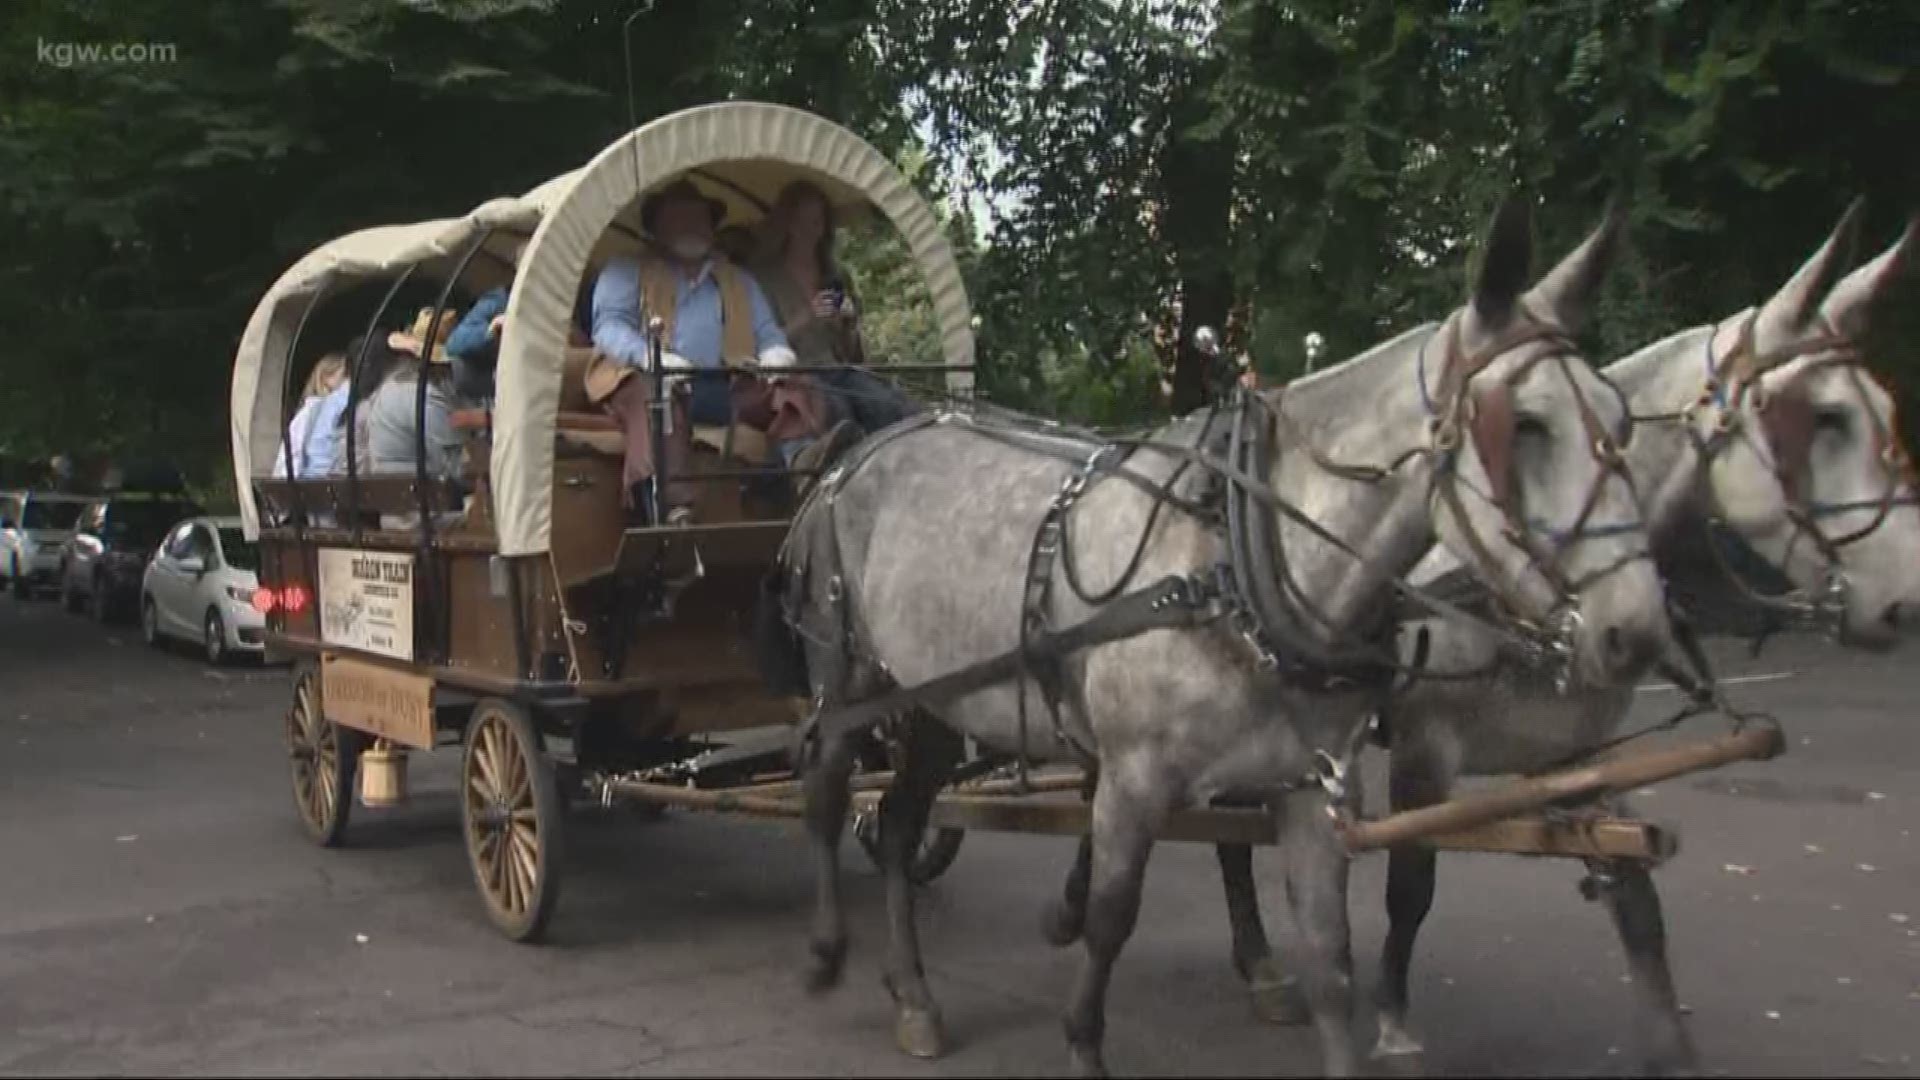 2018 marks the 175th anniversary of the Oregon Trail and Travel Oregon and Lyft are teaming up to offer free wagon rides in Downtown Portland this week.